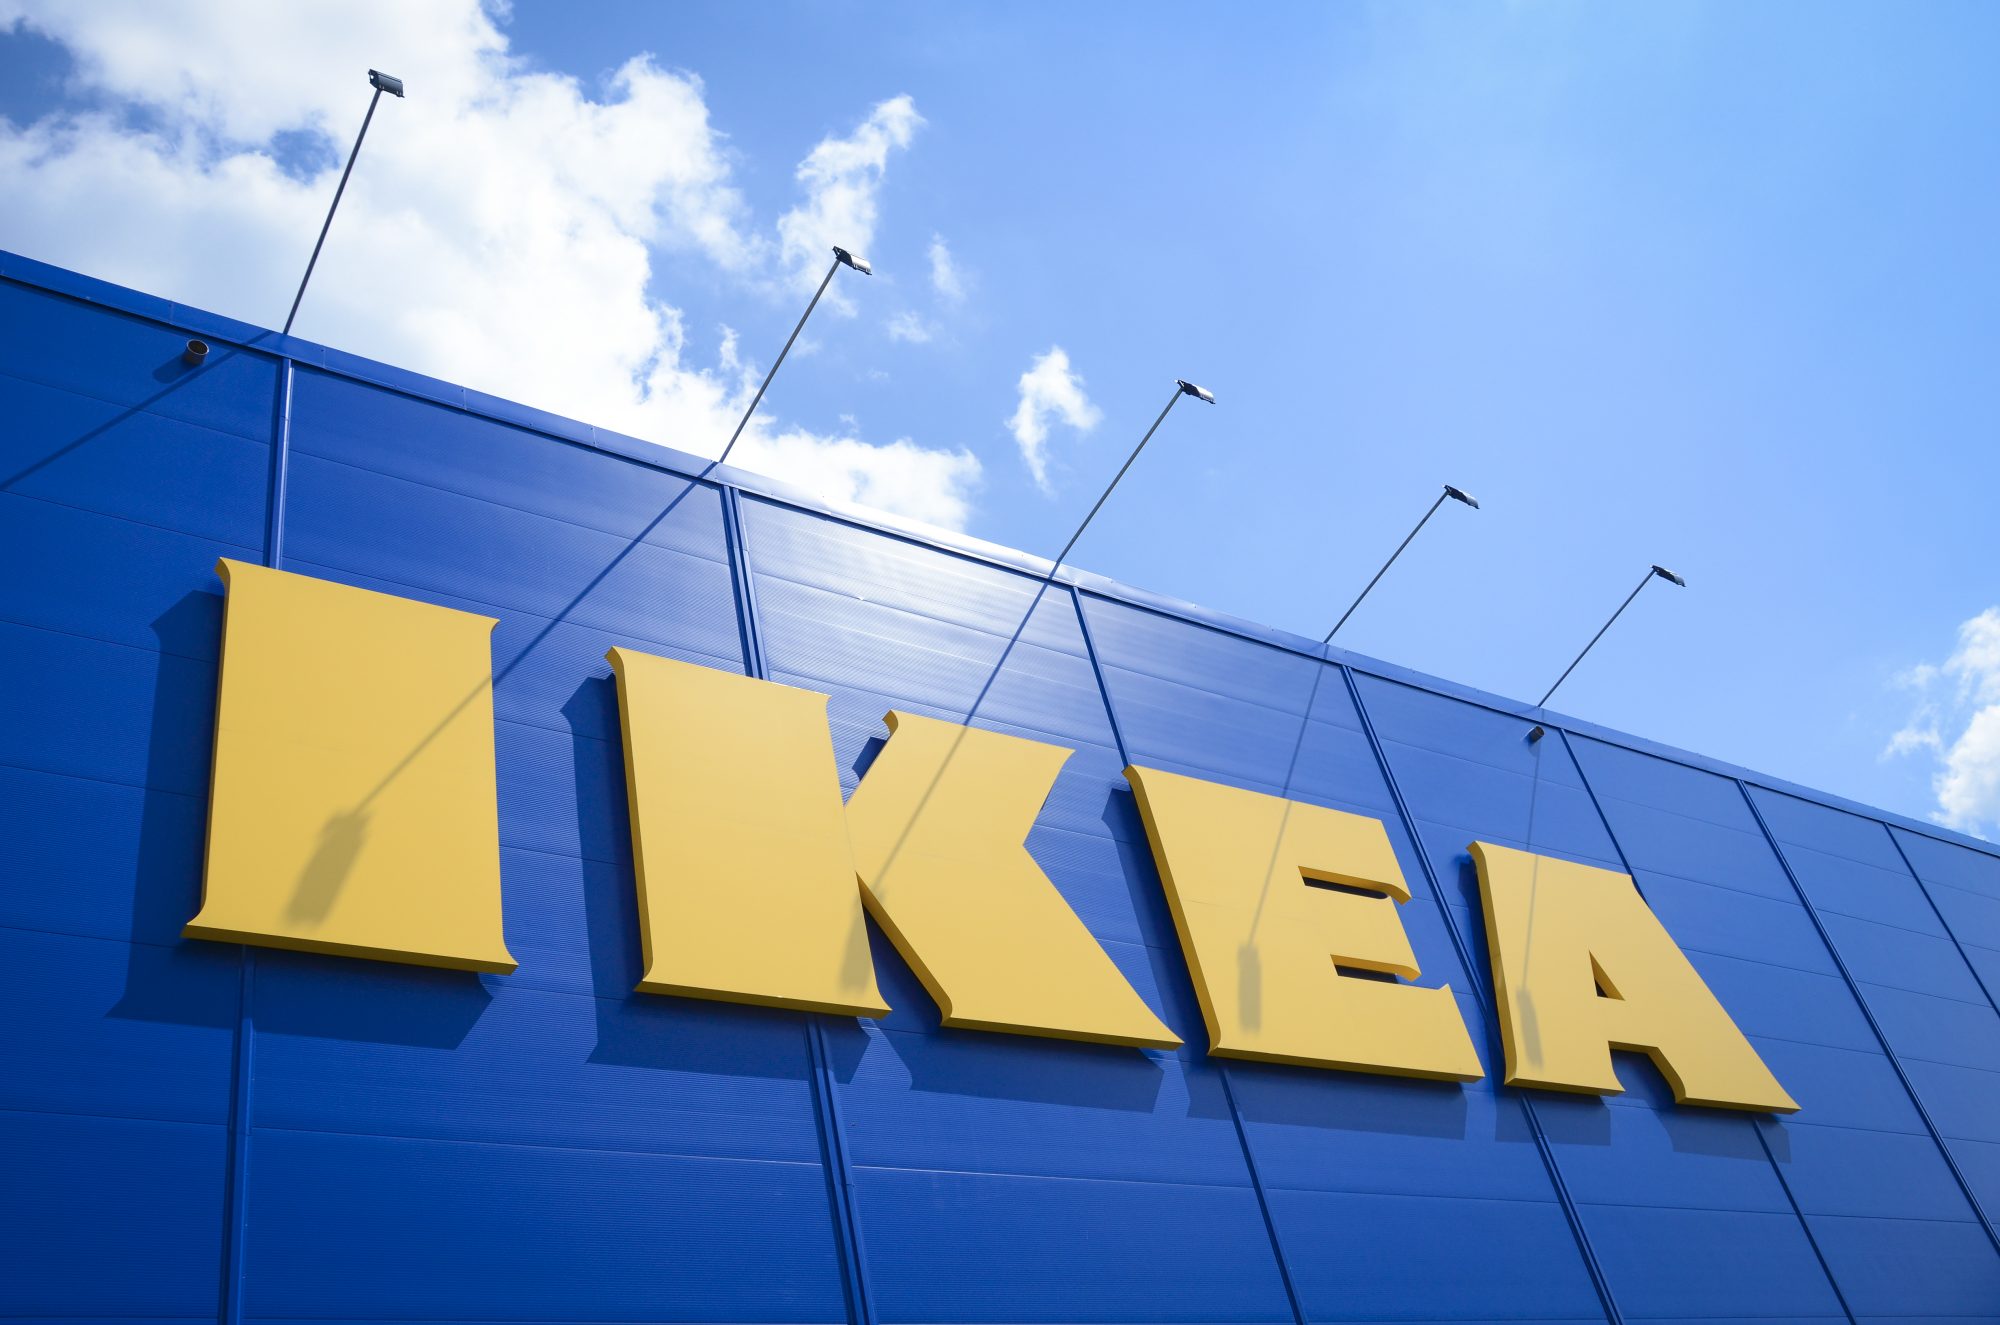 IKEA Greenwich was designed and built with sustainability at its